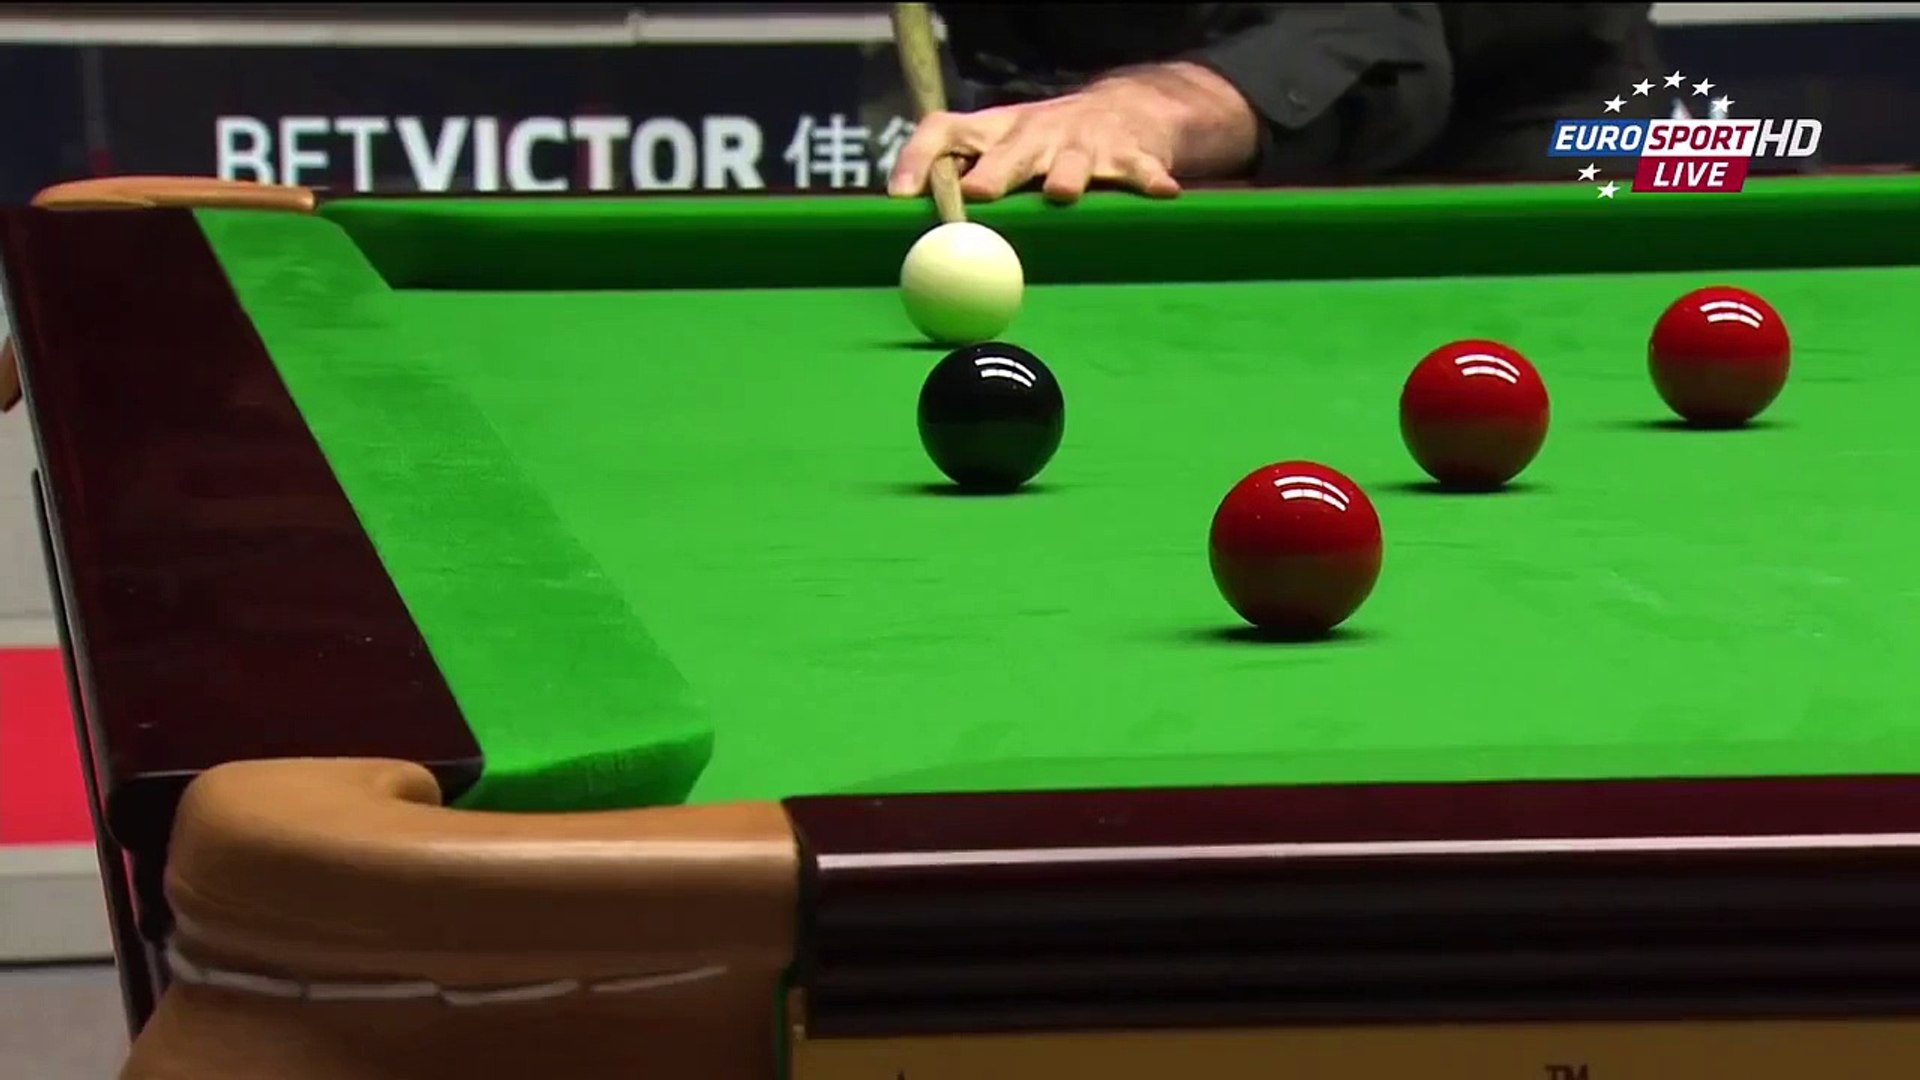 THE FASTEST SNOOKER 147 BREAK EVER by Ronnie OSullivan